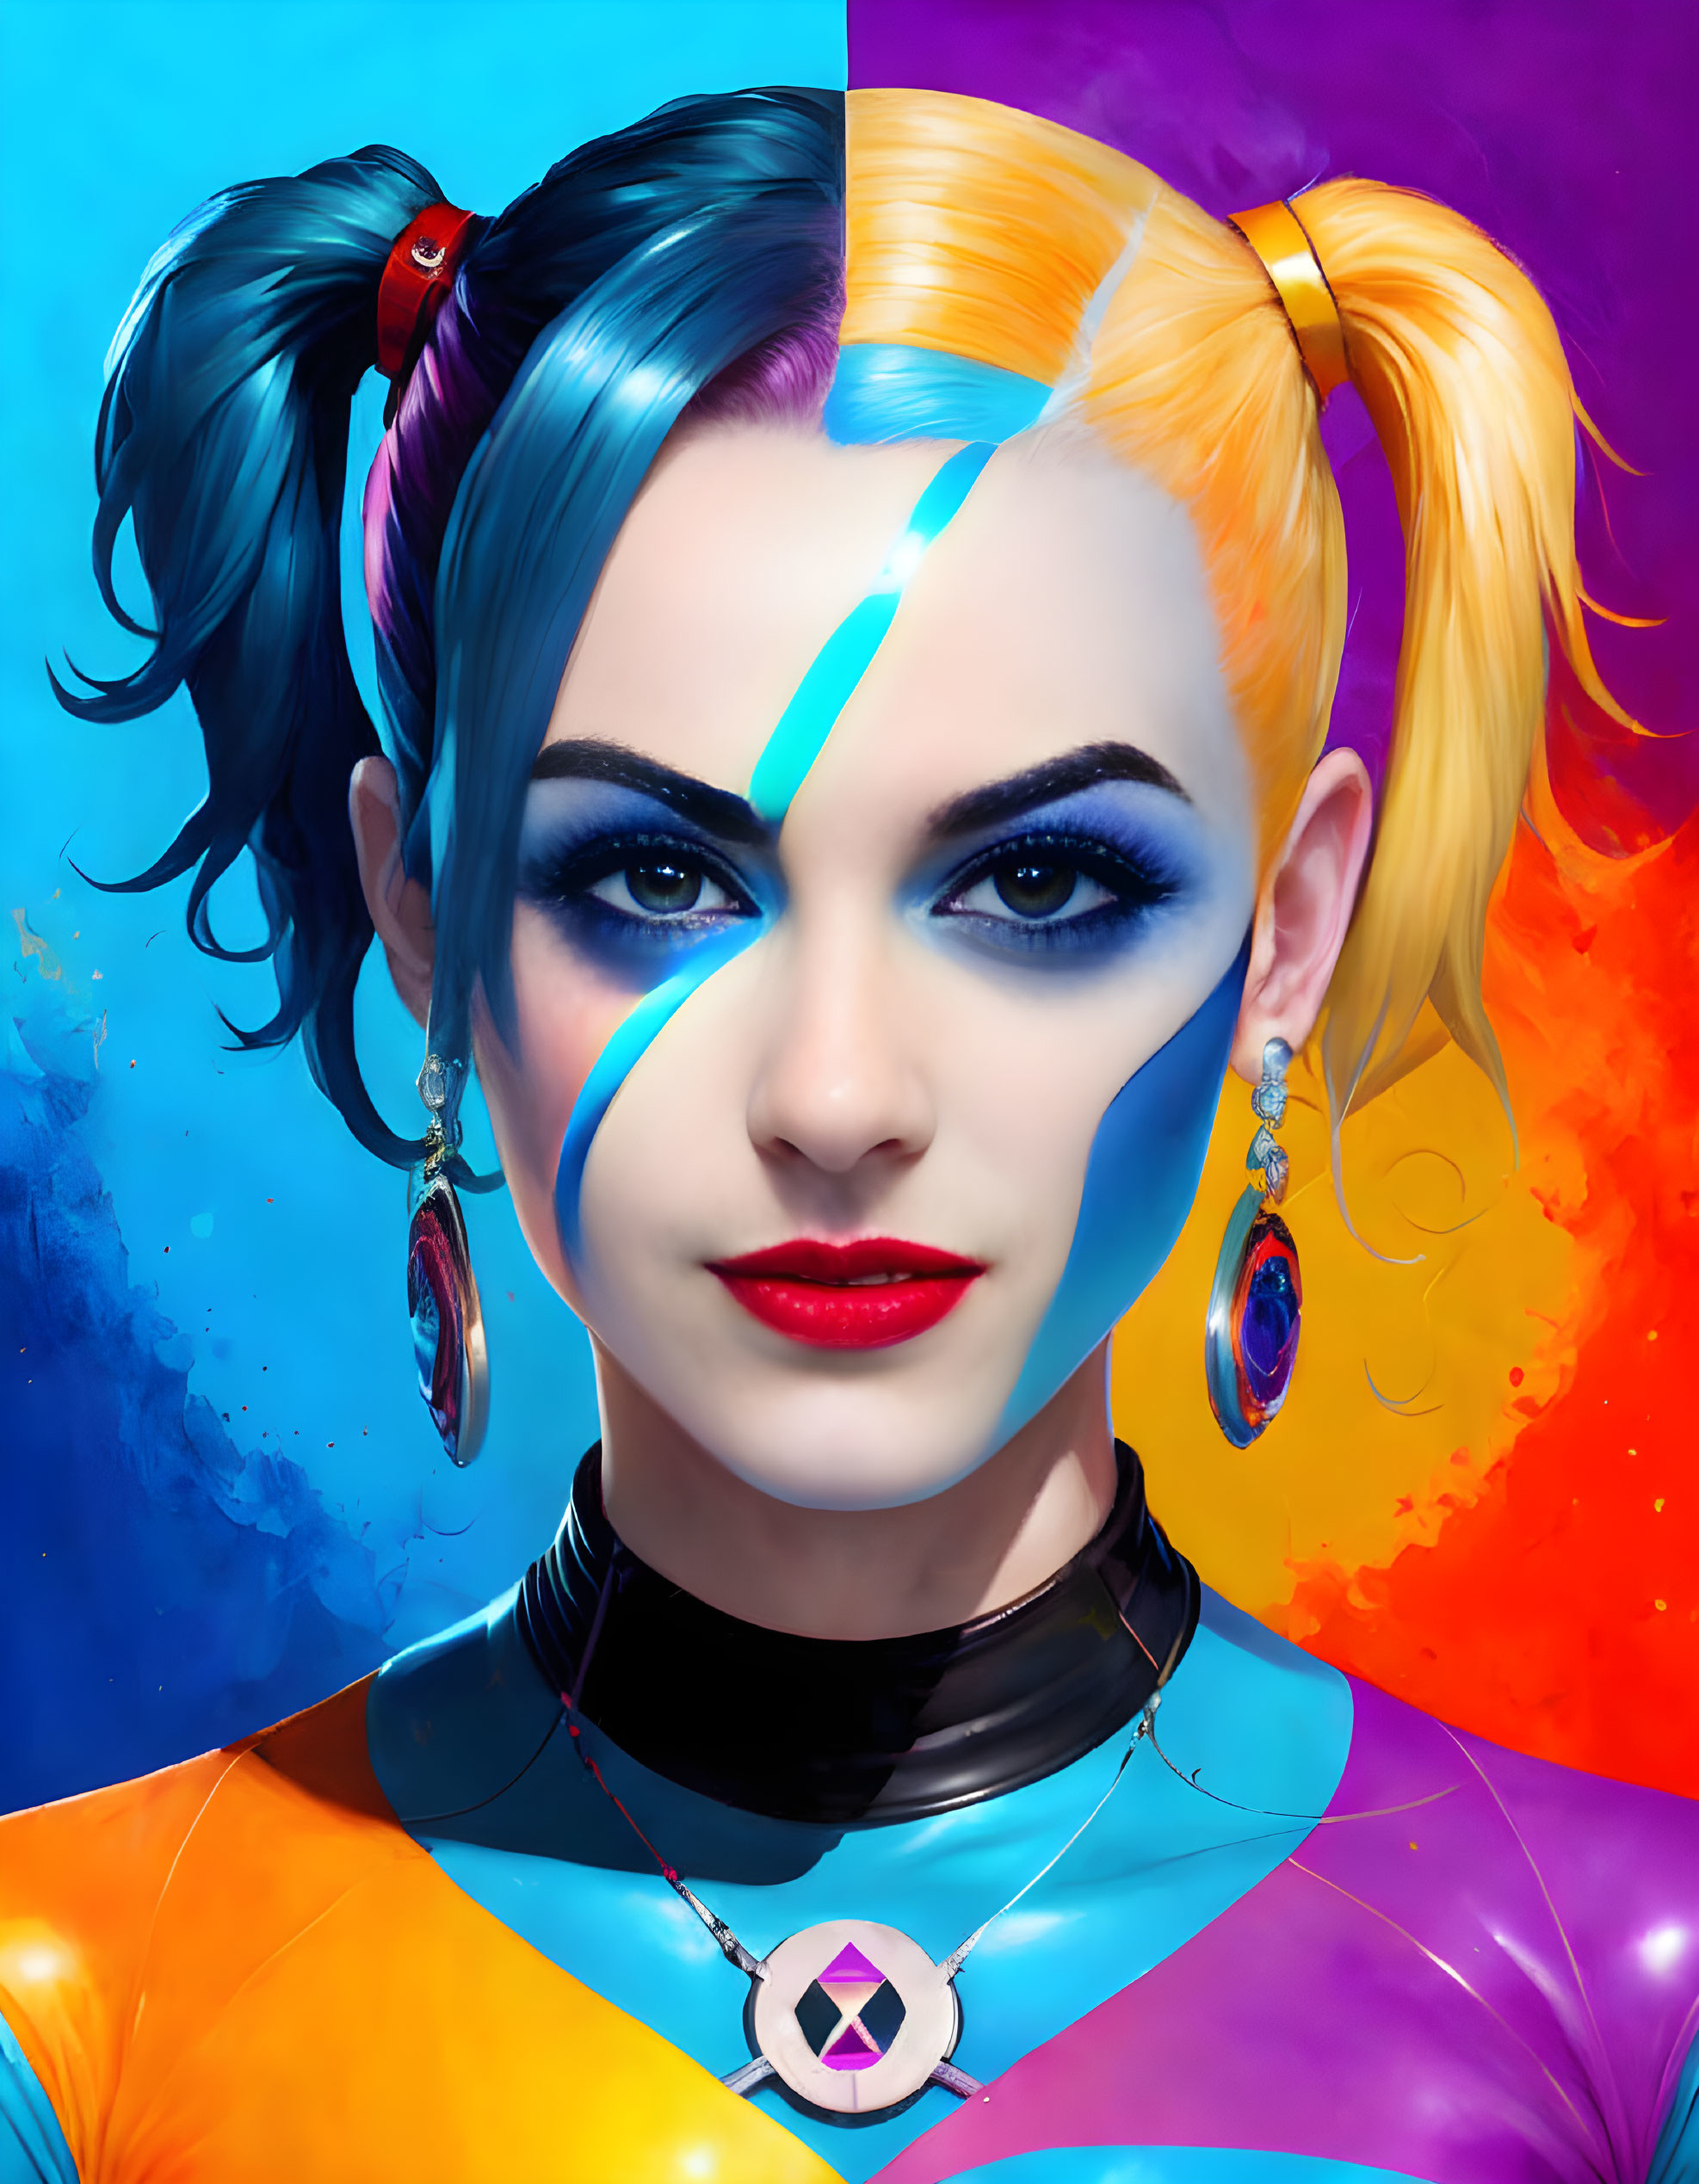 Stylized female portrait with colorful makeup and hair and blue streak on face